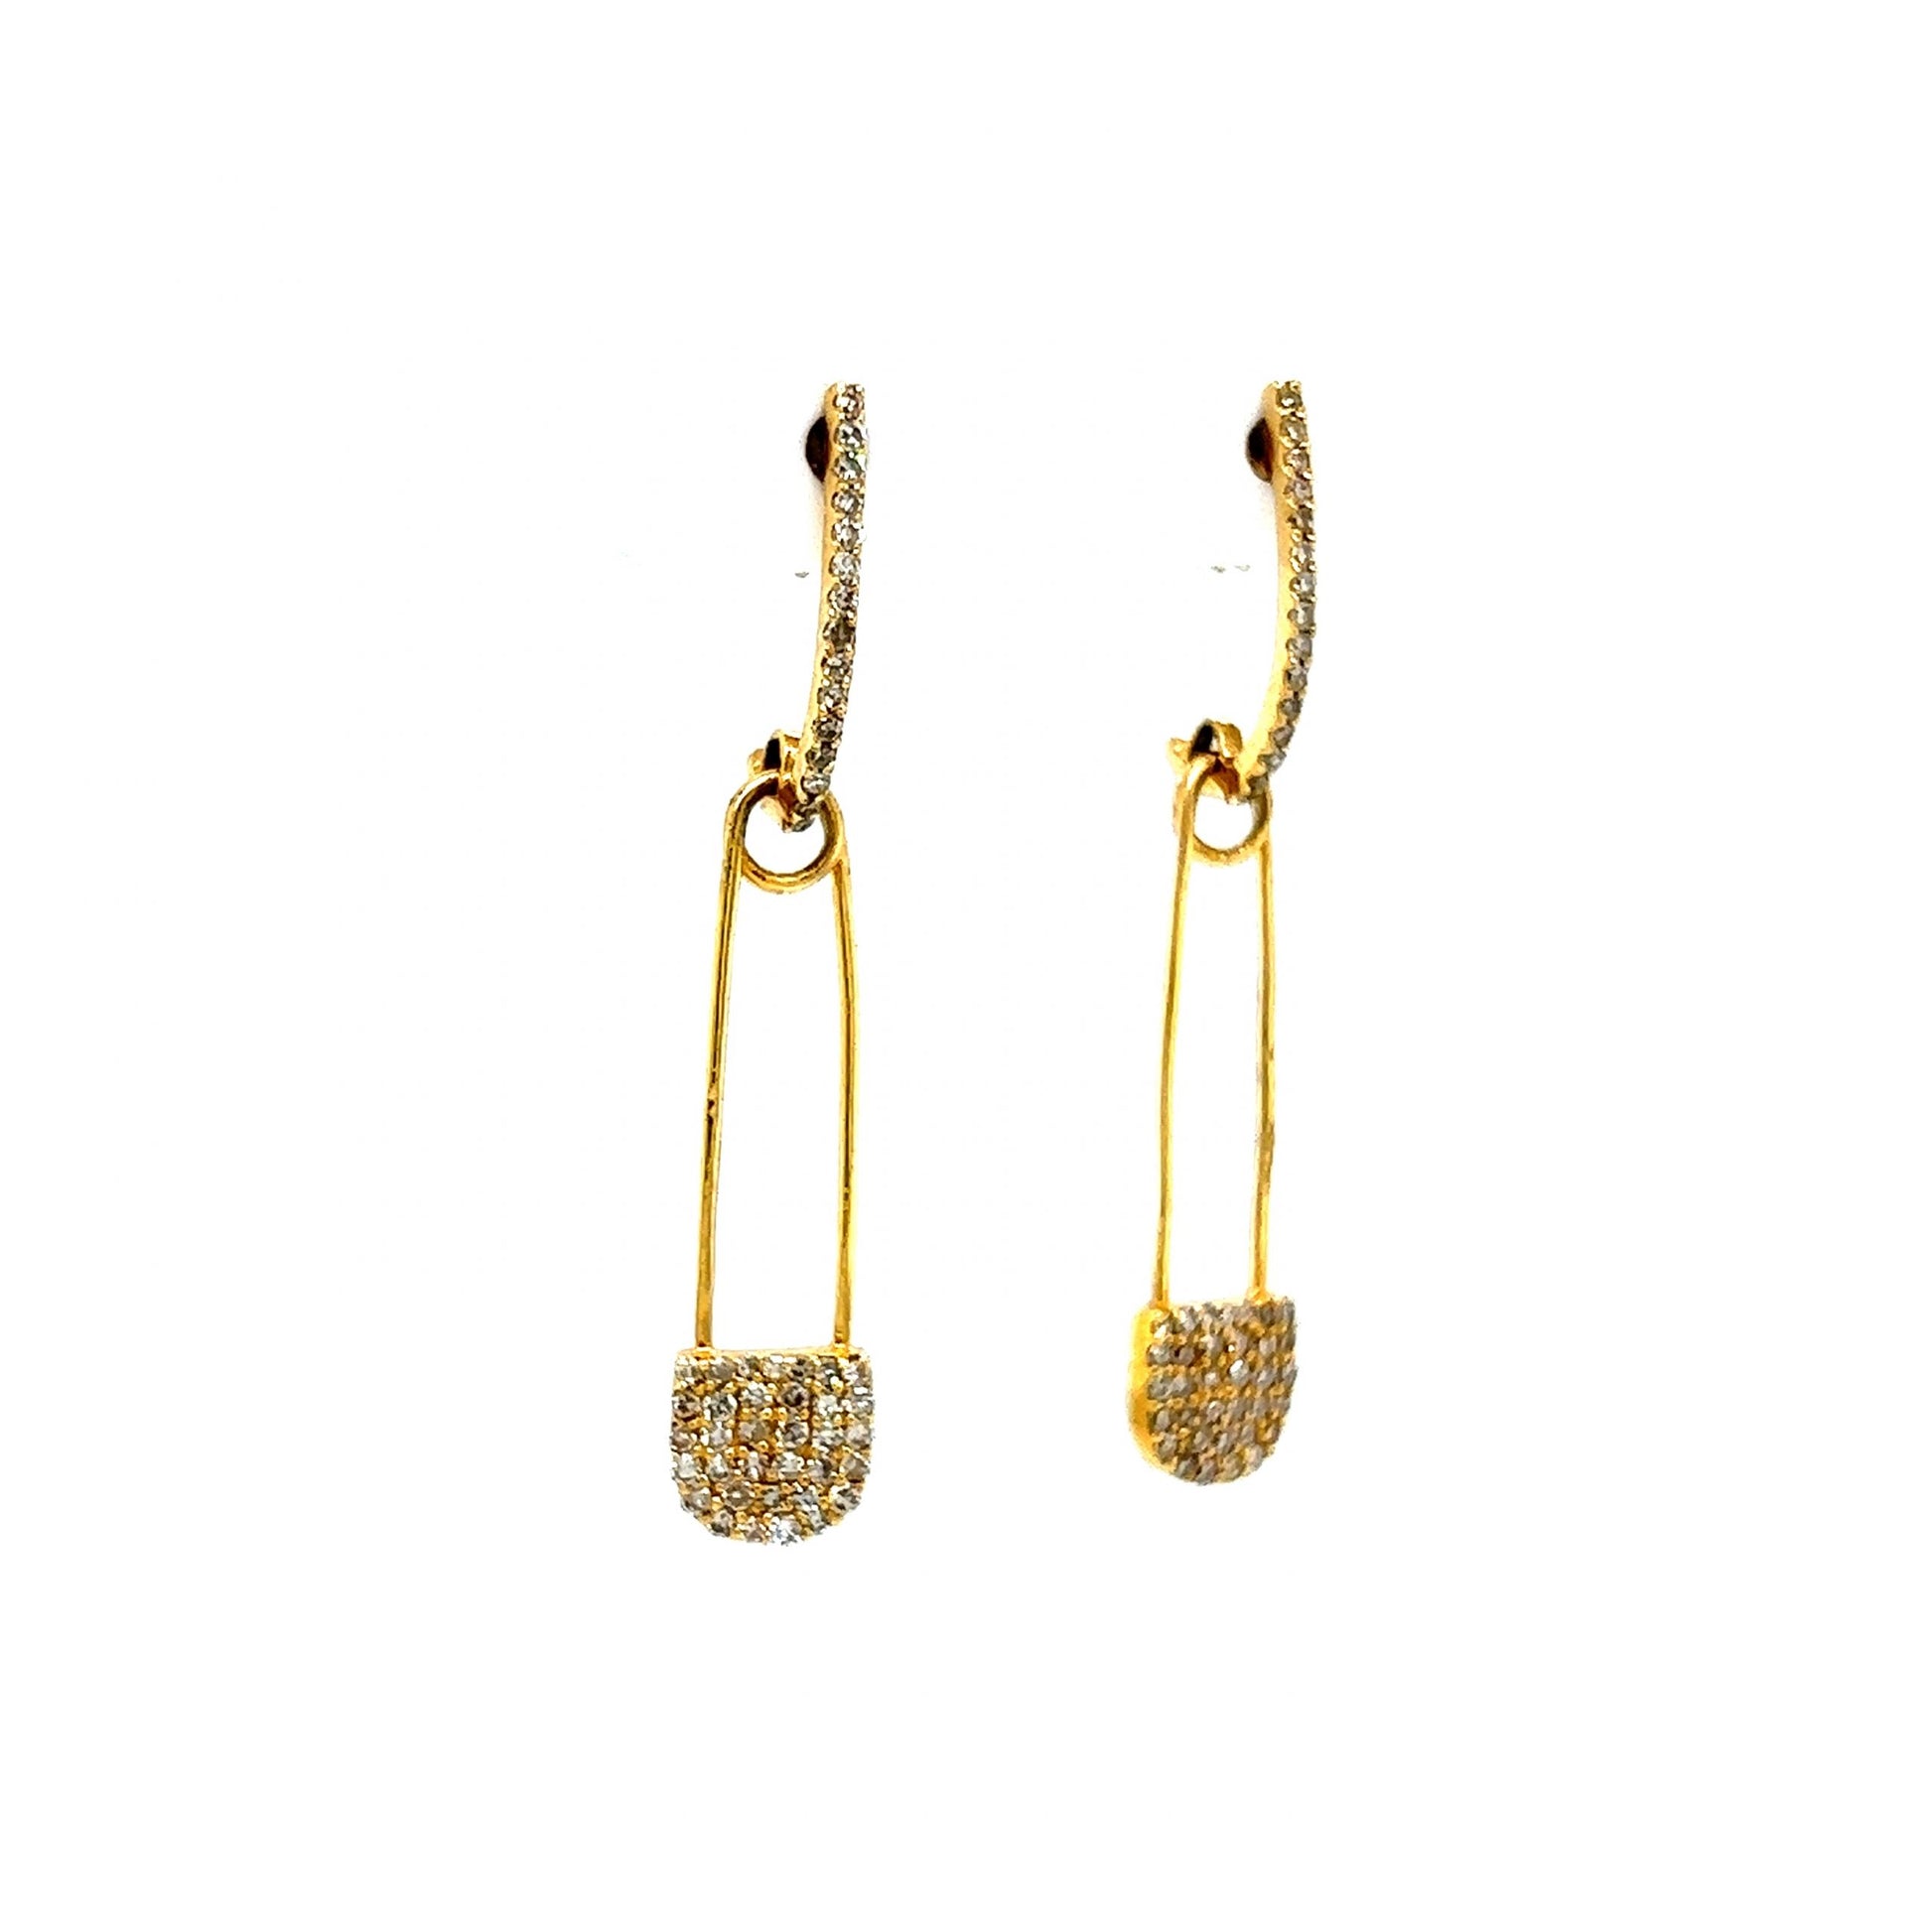 Pave Diamond Safety Pin Drop Earrings in 14k Yellow Gold